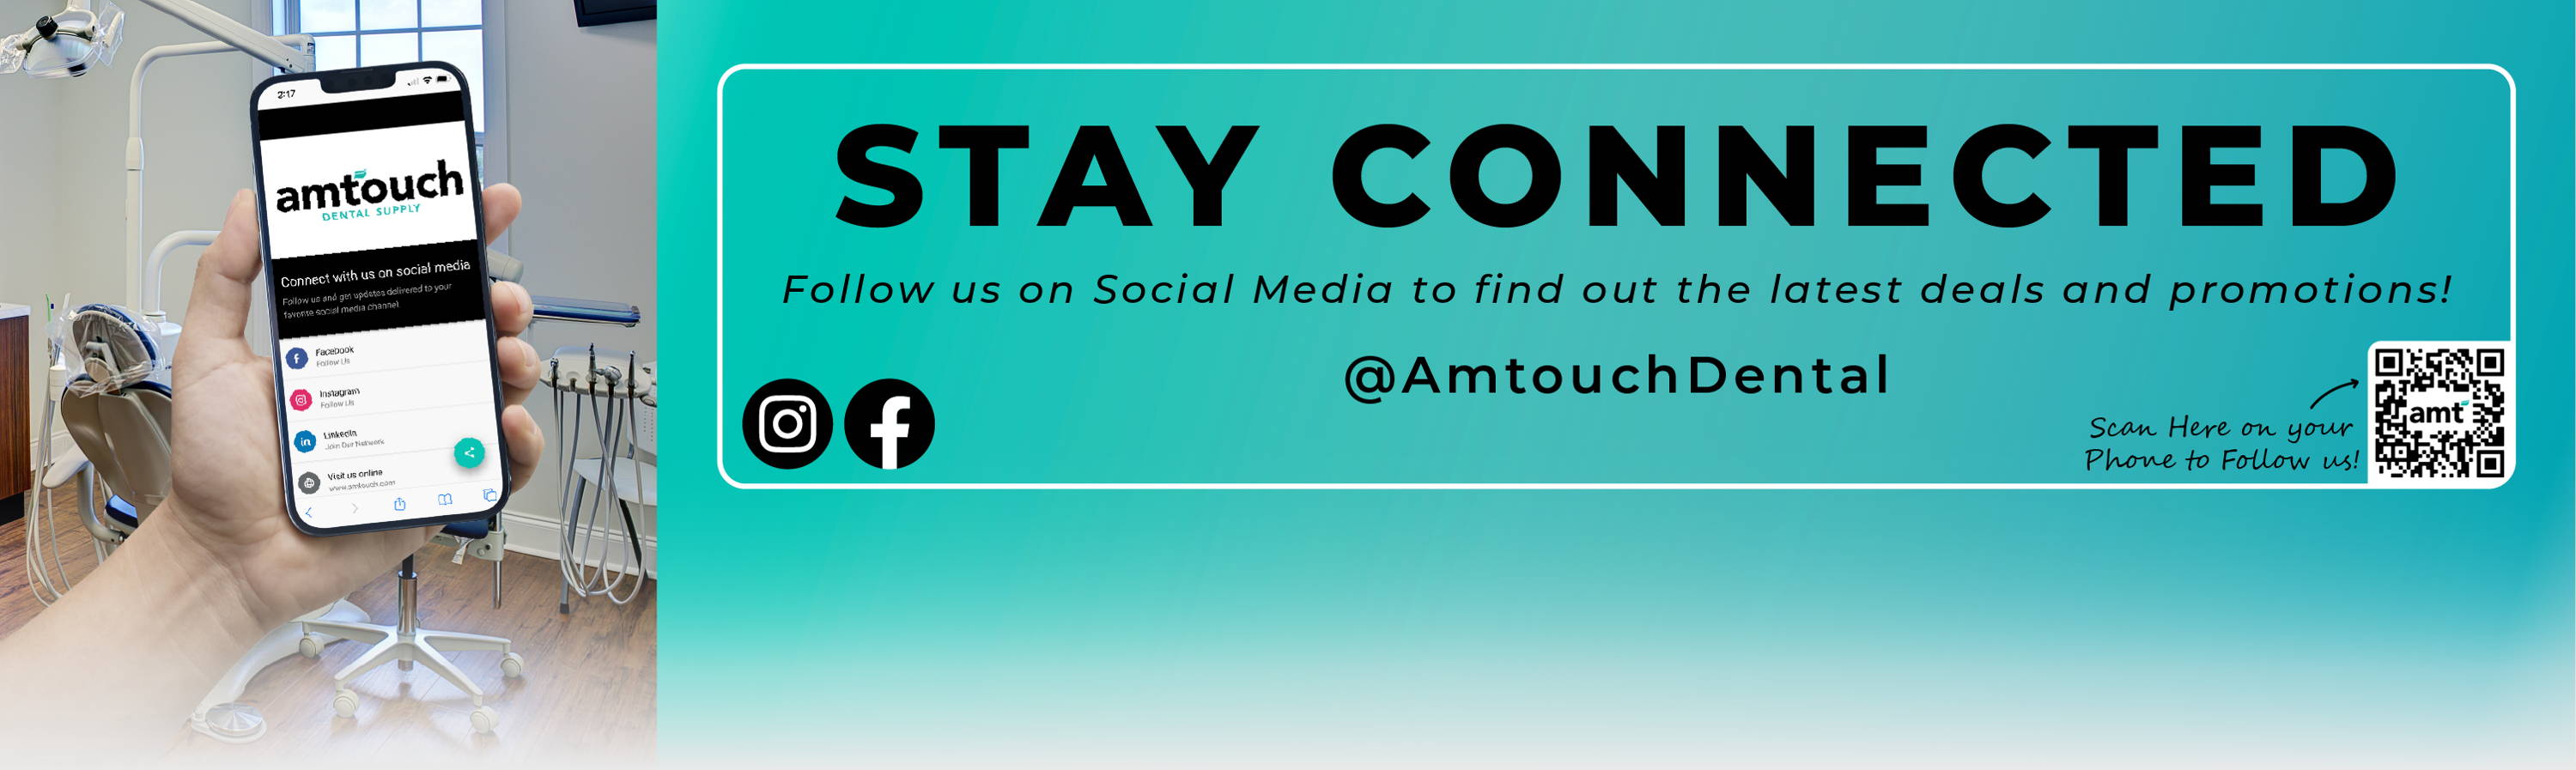 Follow Amtouch Dental Supply of Social media and stay up to date with special deals and office activities!